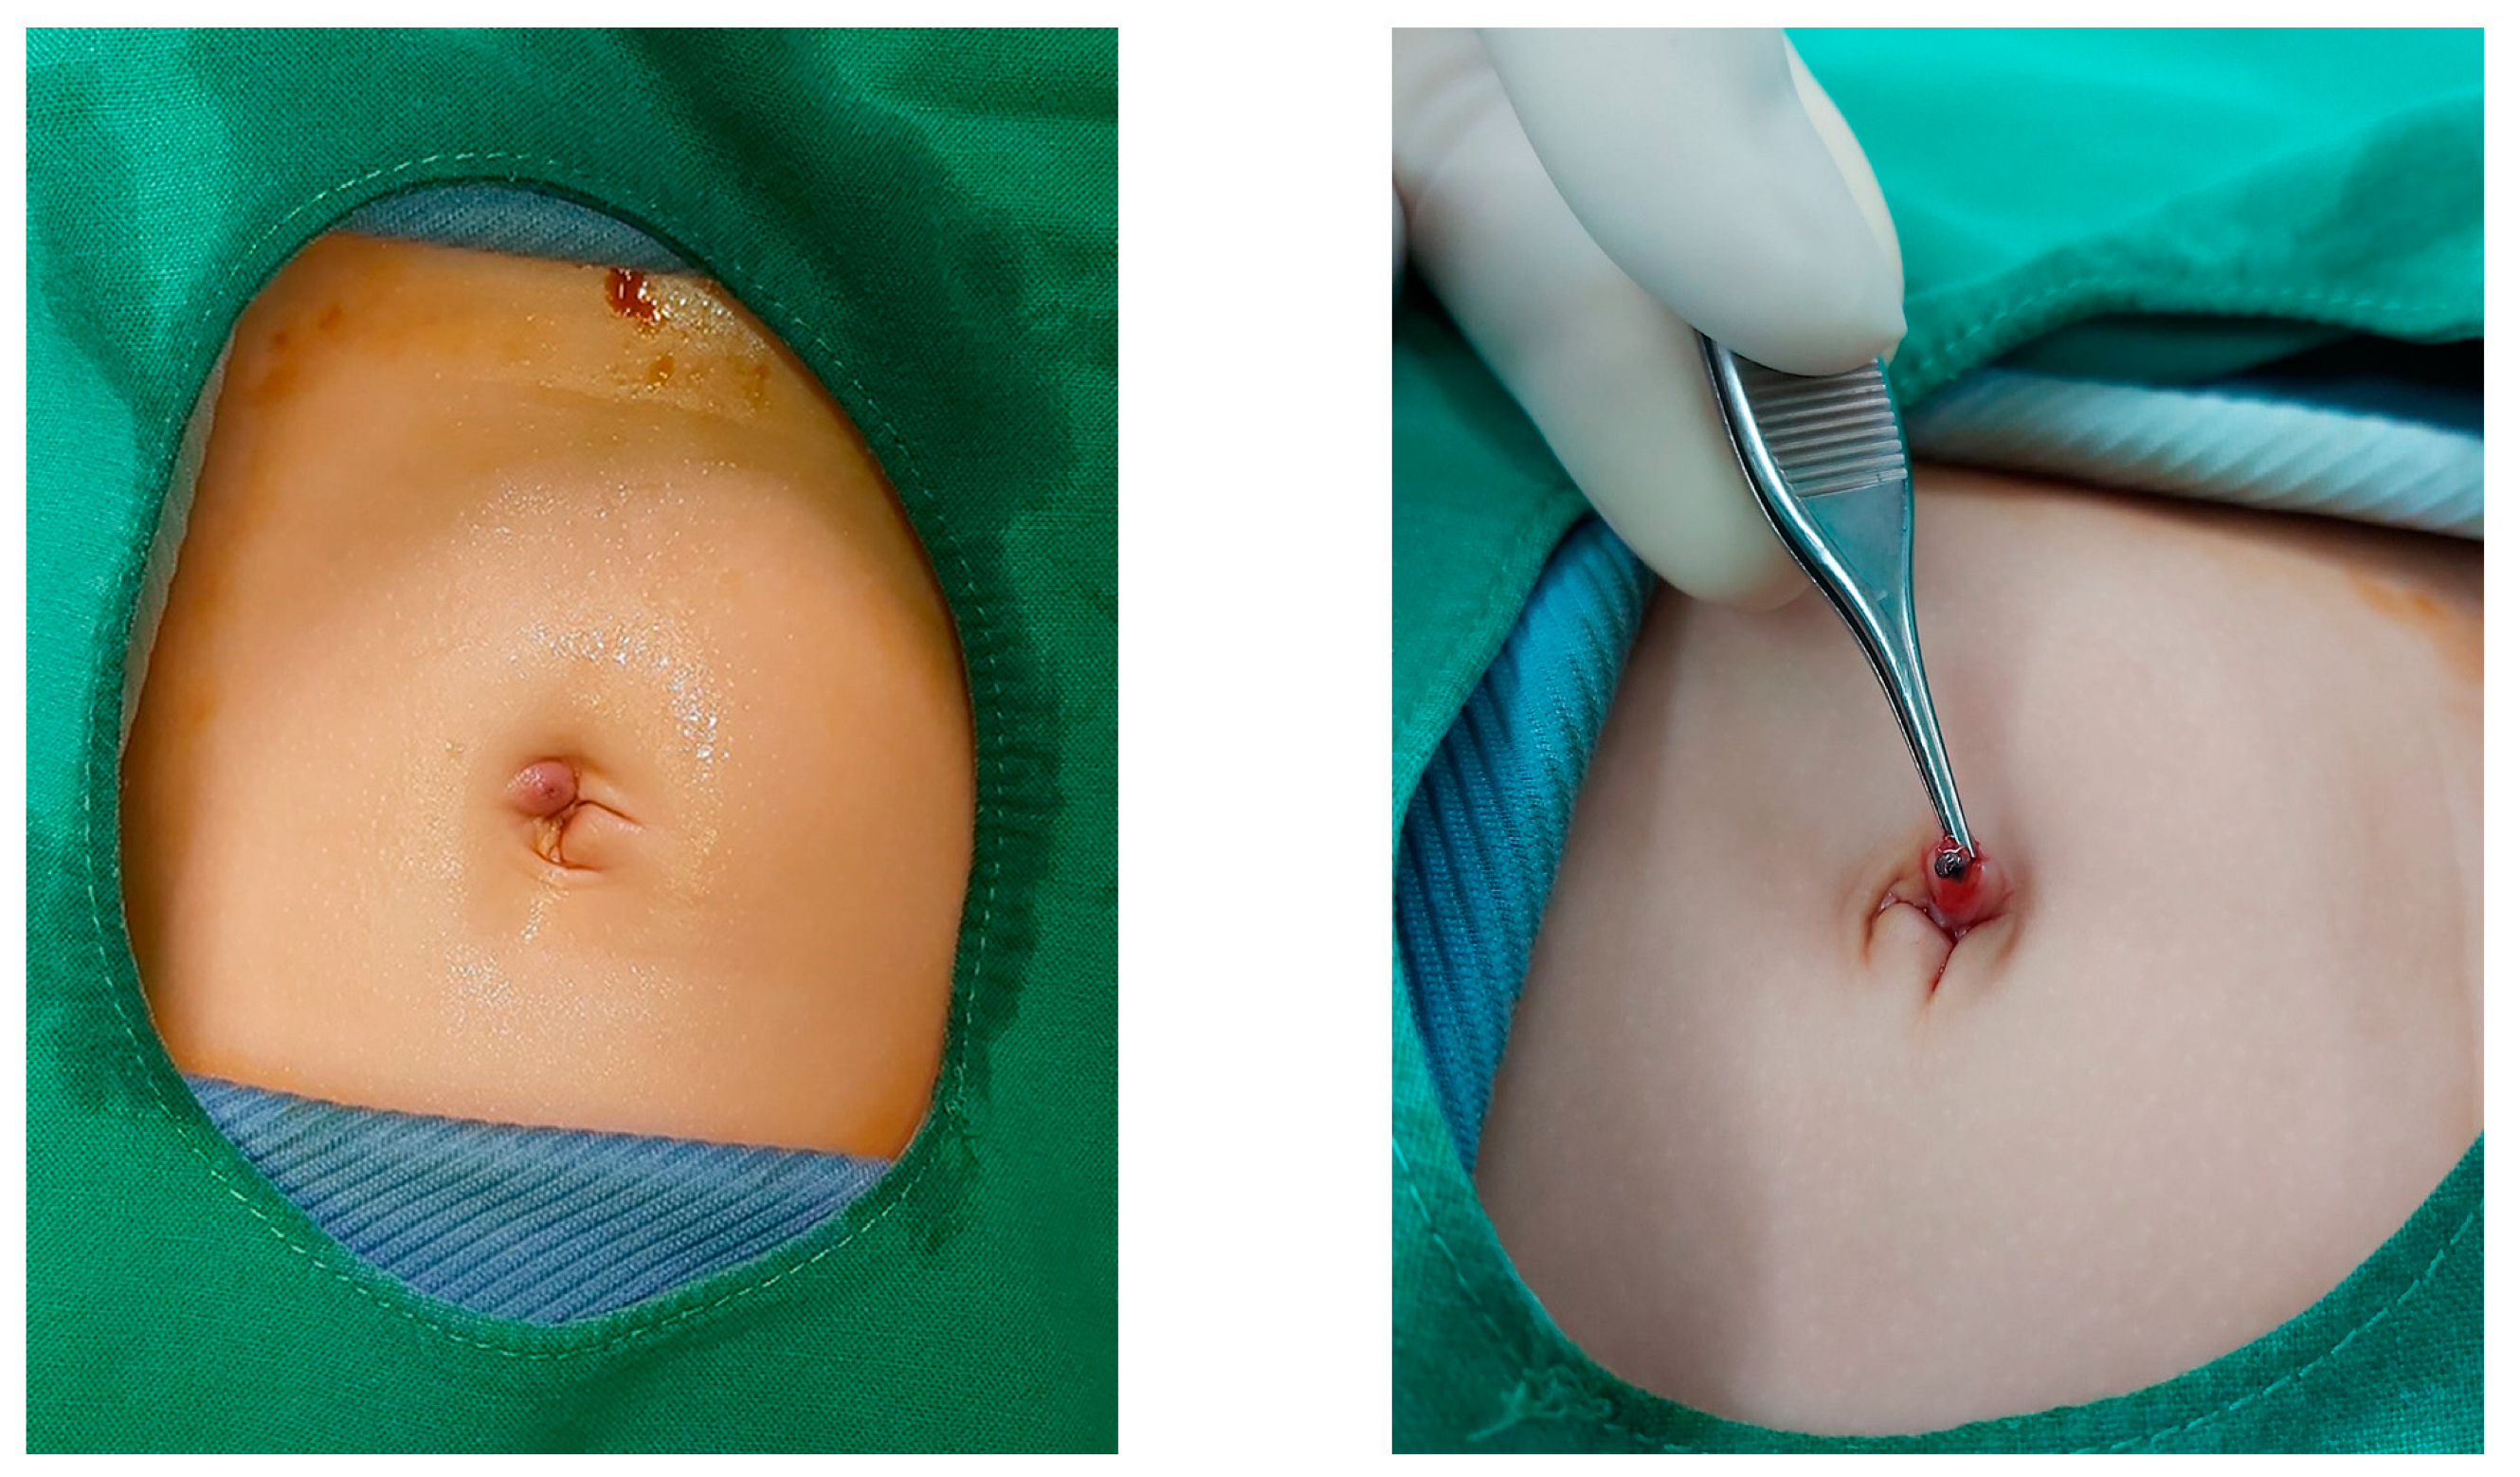 Kids Pelvic Surgery - Umbilical Hernia (Belly button hernia or naaf ka  hernia) is a commonly seen condition in newborn babies. Its causes,  symptoms, presentation, treatment, and surgery is being explained here.